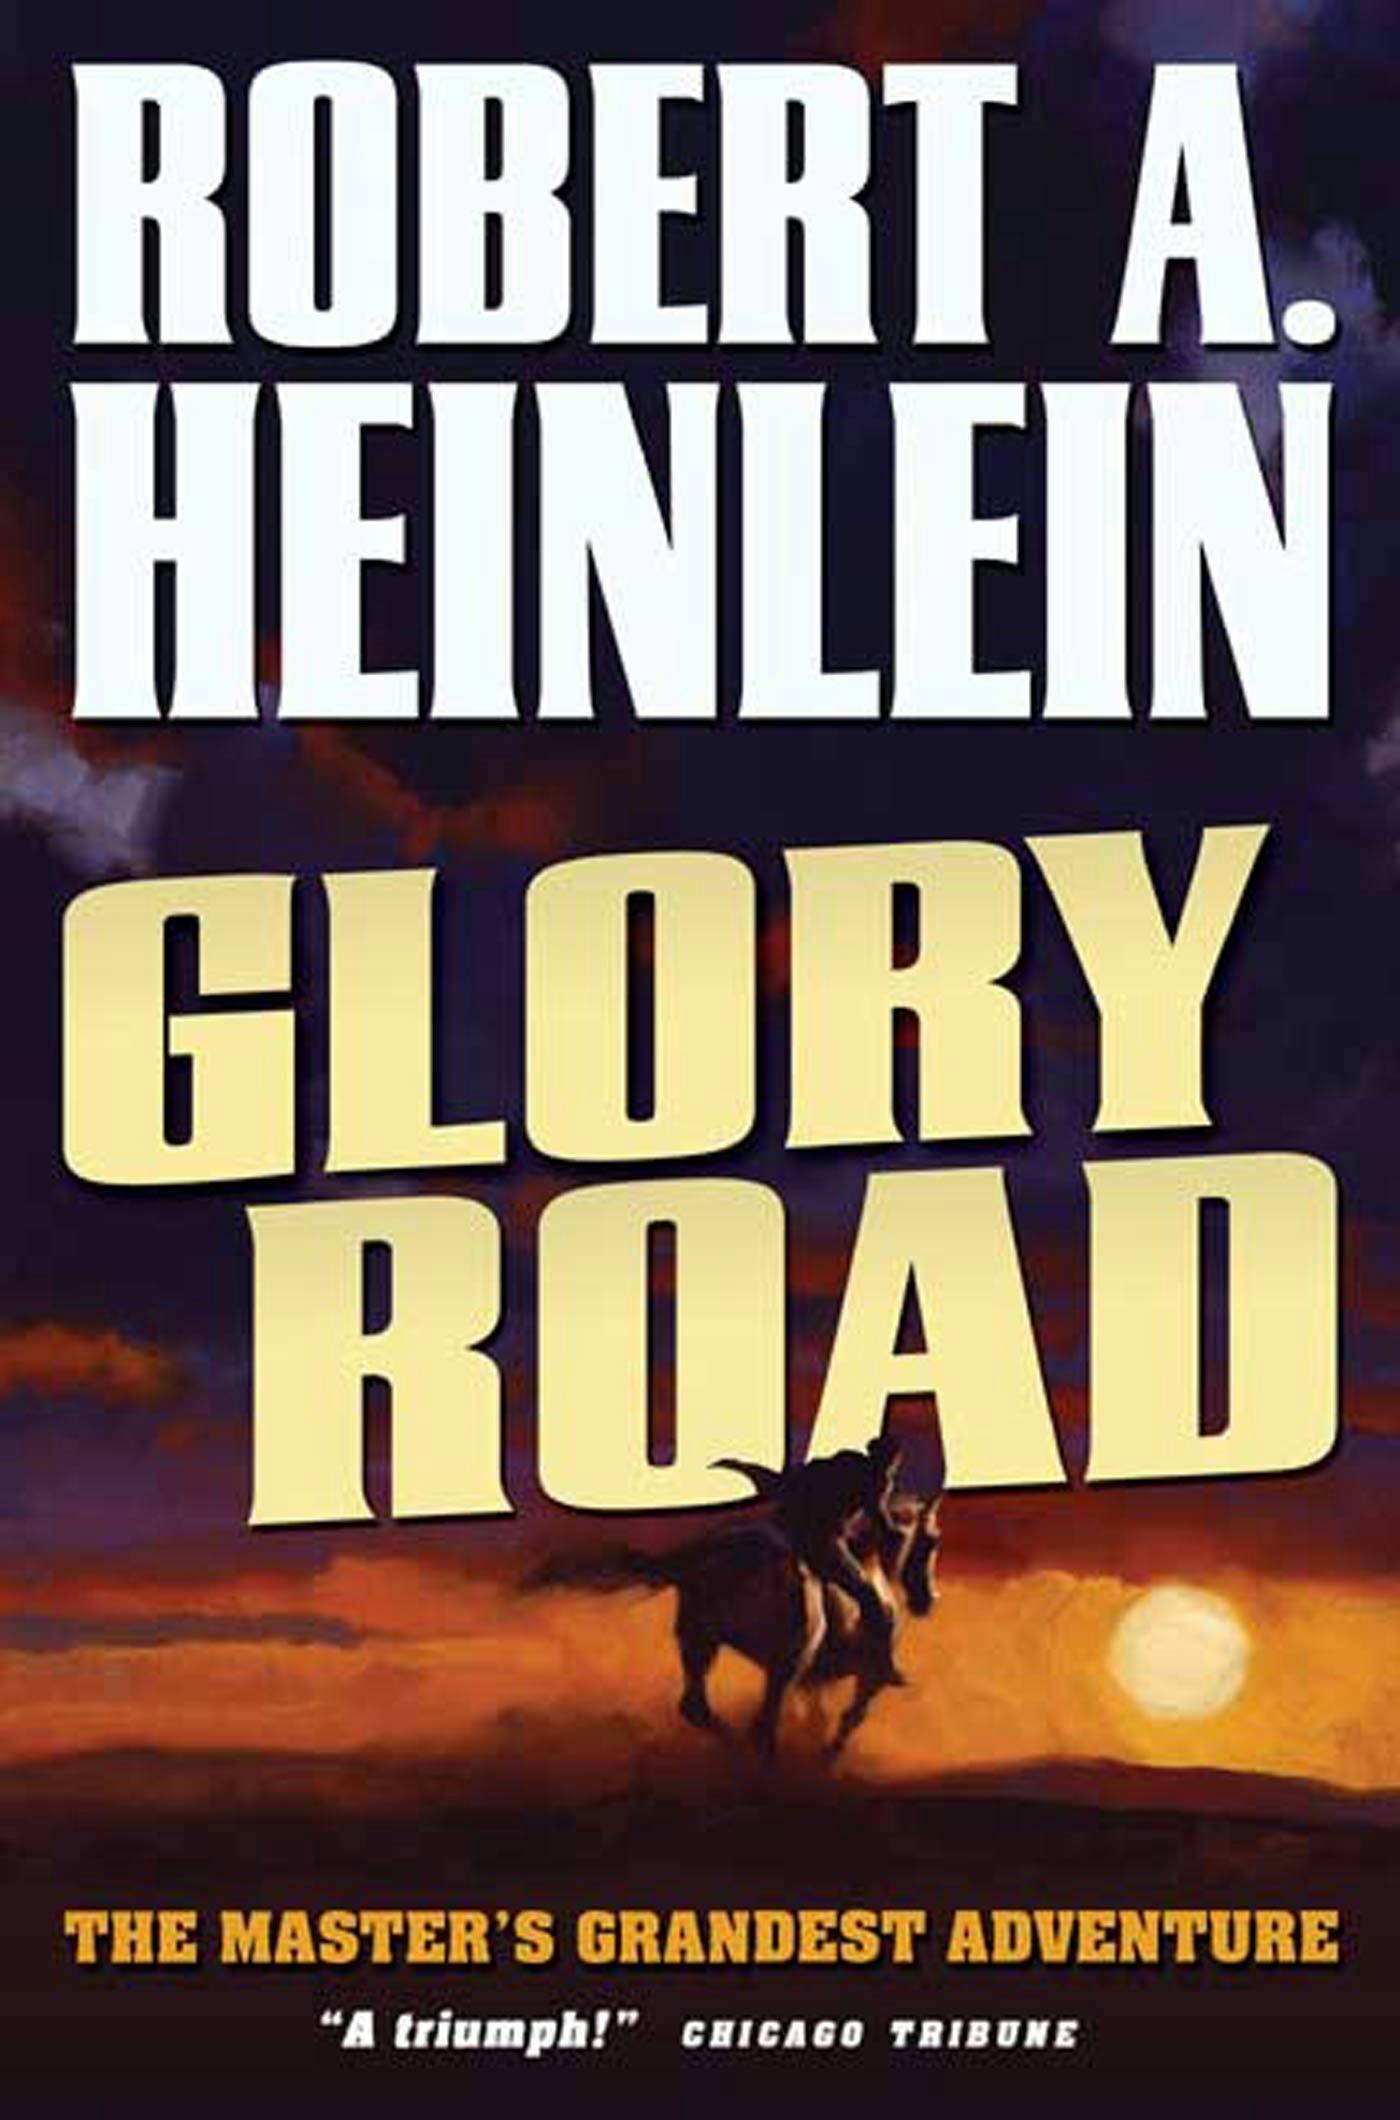 Cover for the book titled as: Glory Road